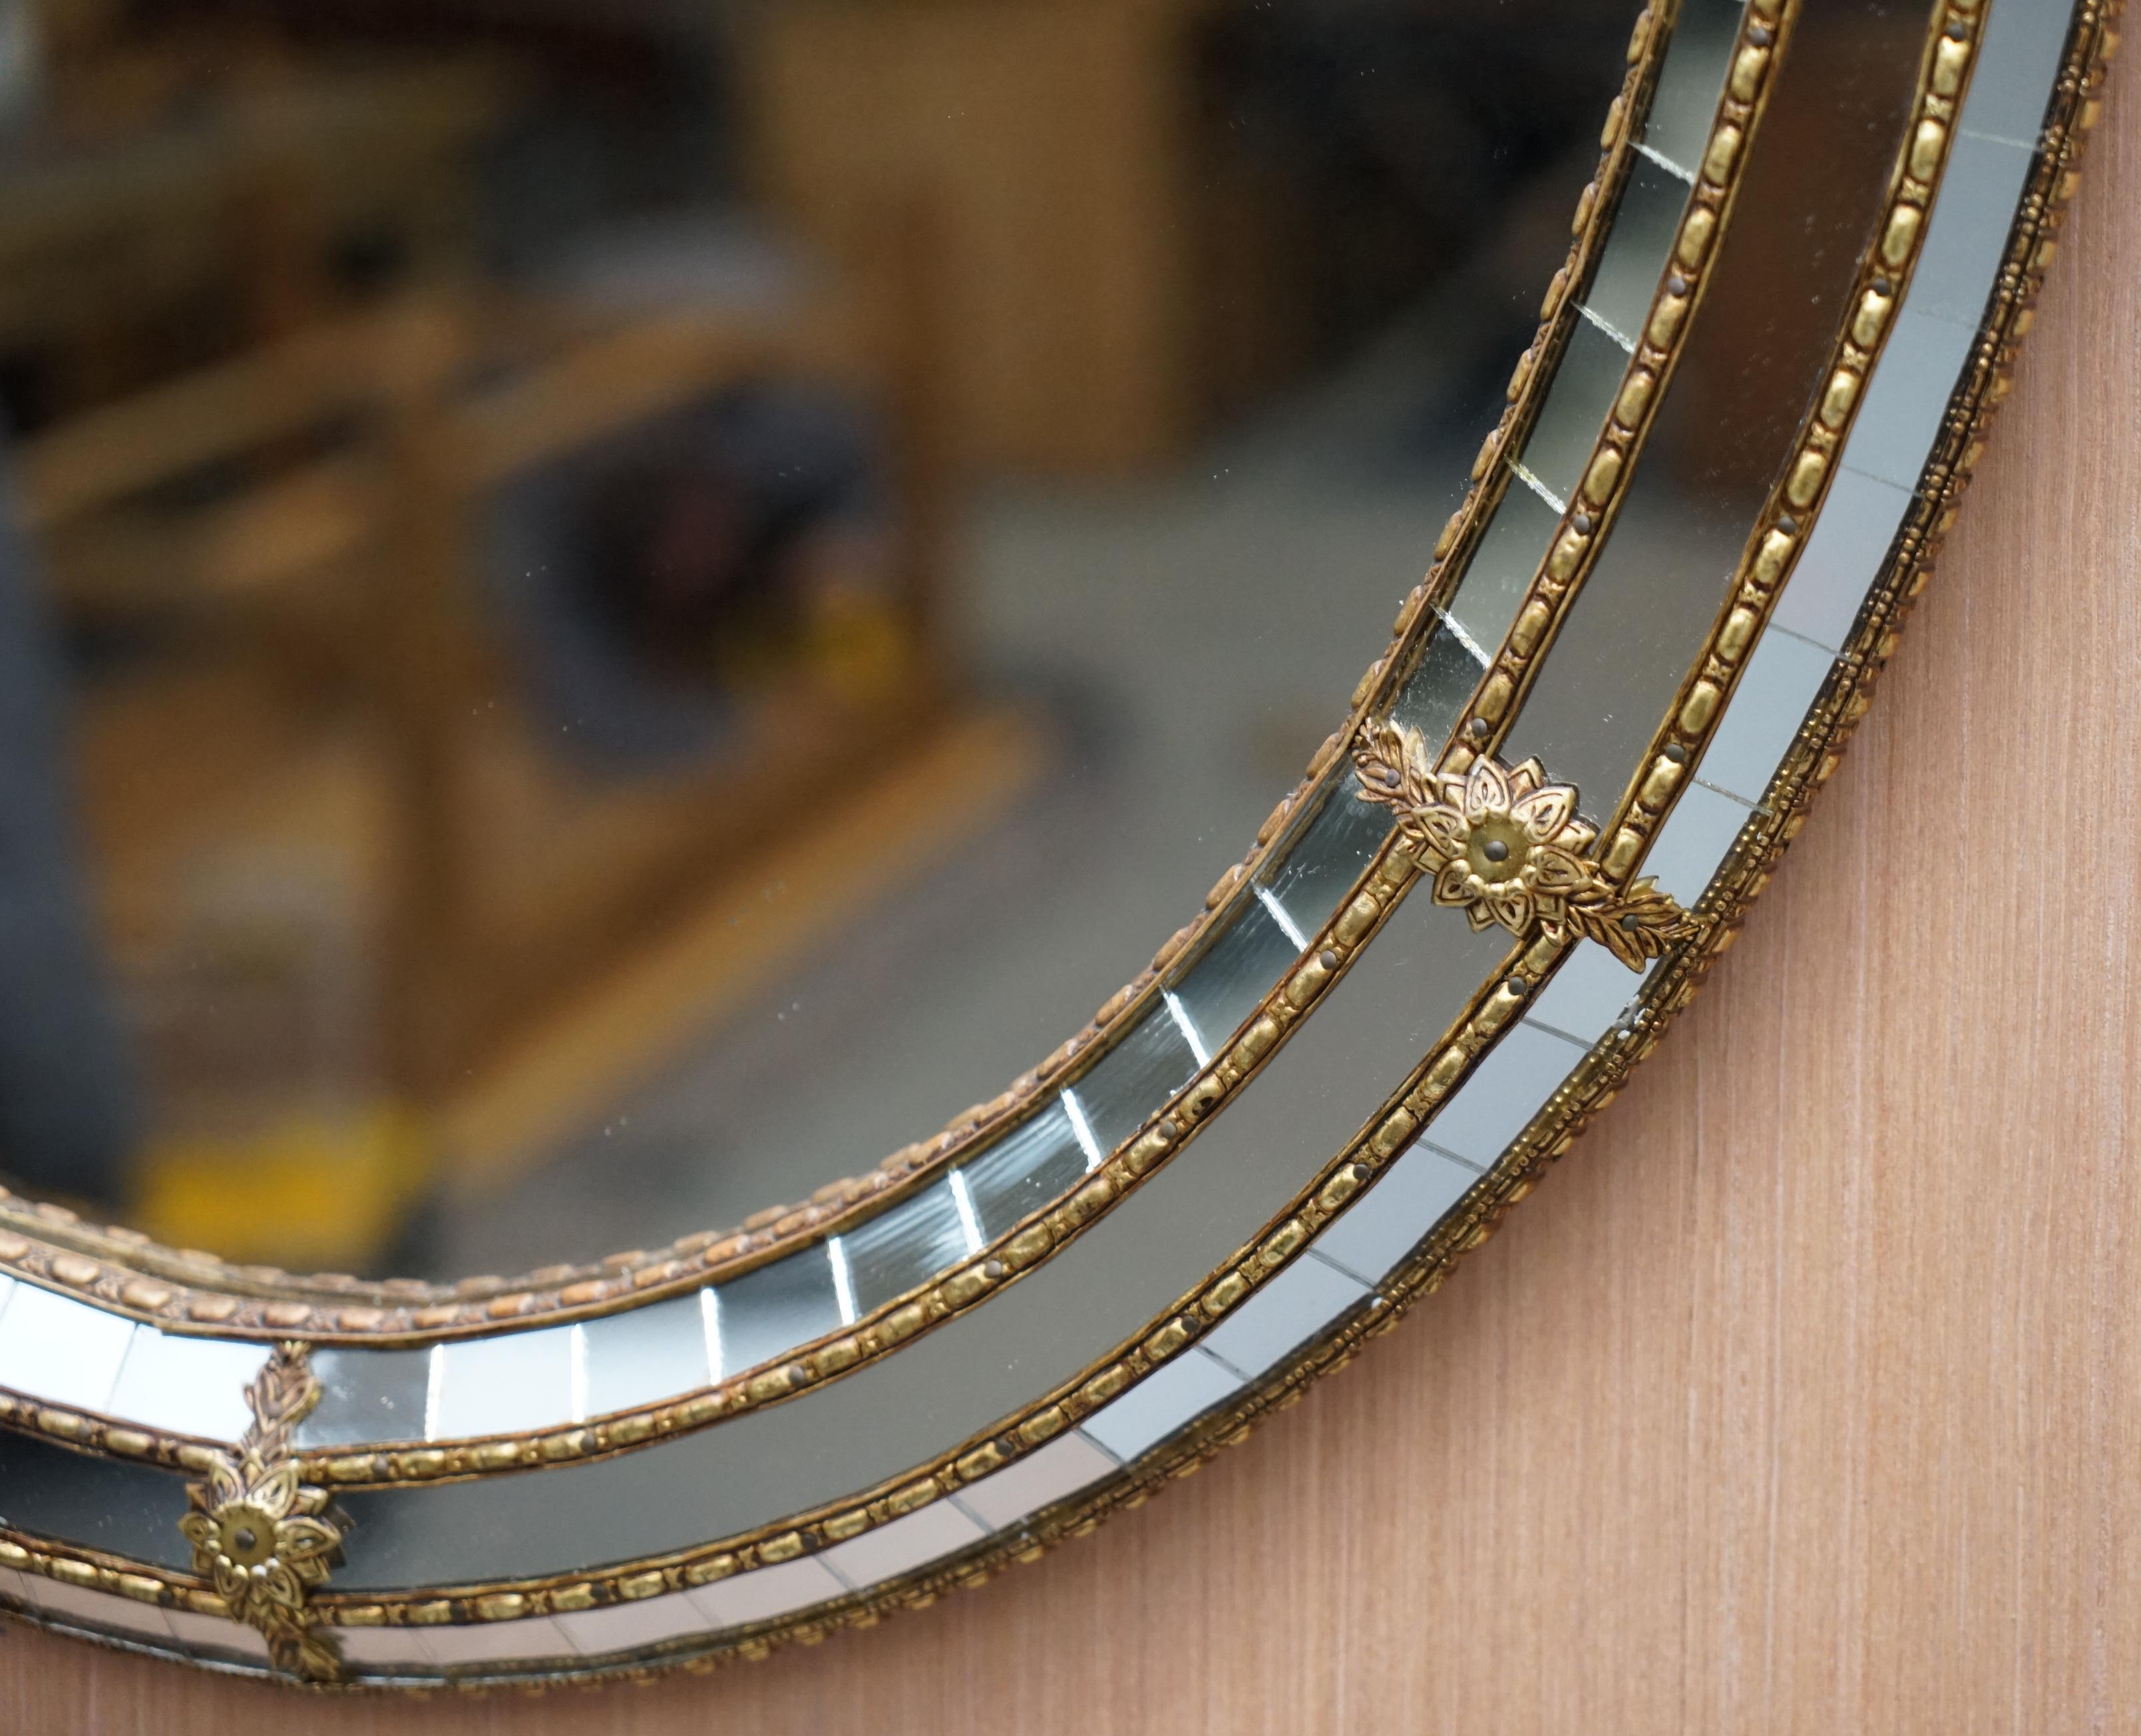 Stunning Venetian Oval Mirror with Mosaic Mirror Tiles and Tripled Edged Boarder 2